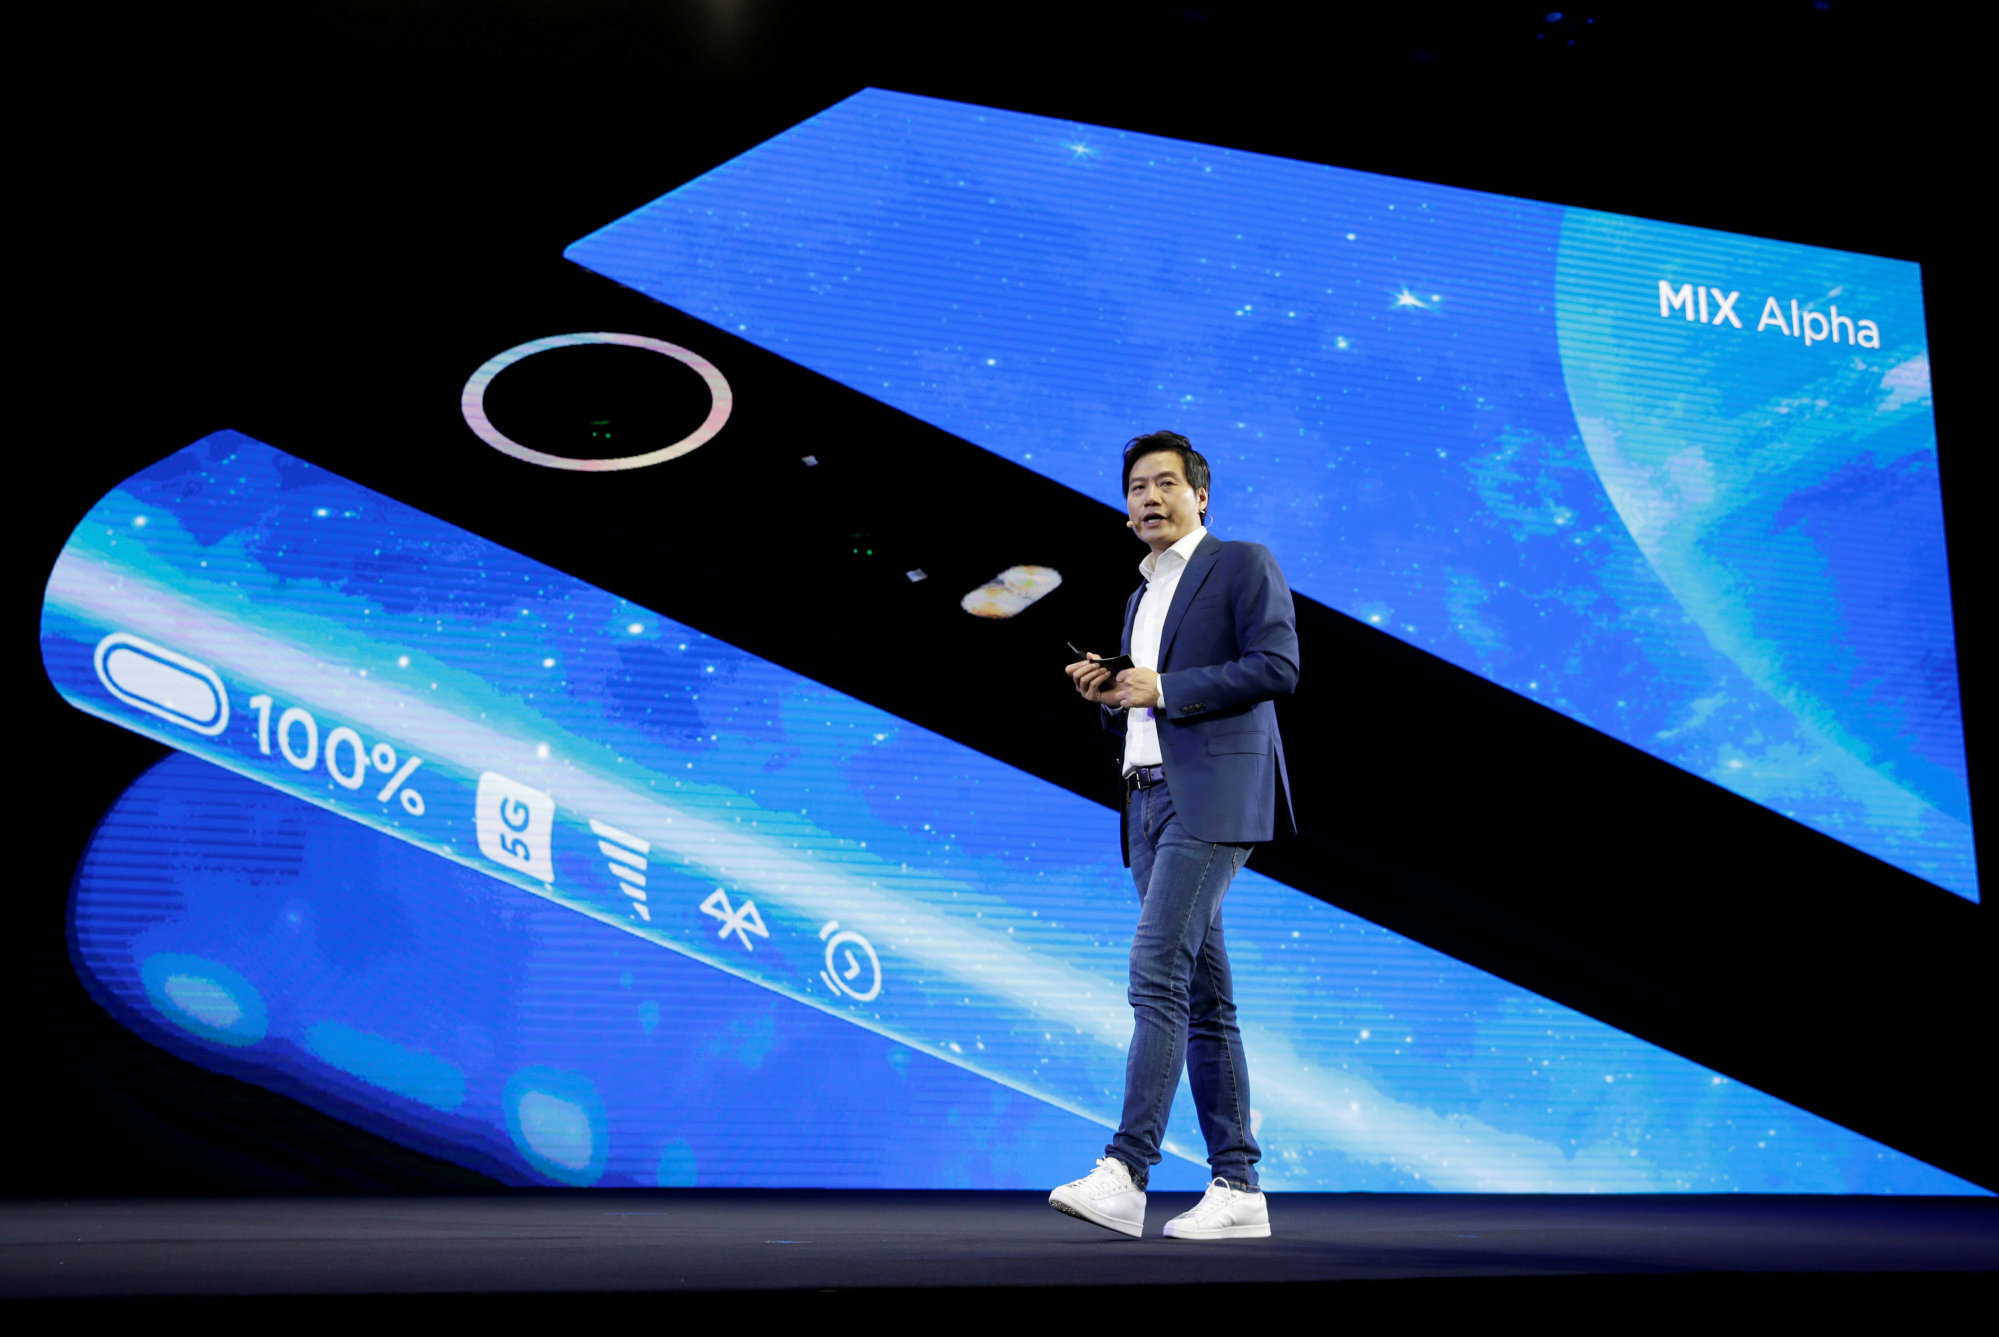 Xiaomi CEO Lei Jun unveils the Mi MIX Alpha, an experimental 5G smartphone that is almost all screen, front and back, in Beijing on September 24, 2019. Photo: Reuters